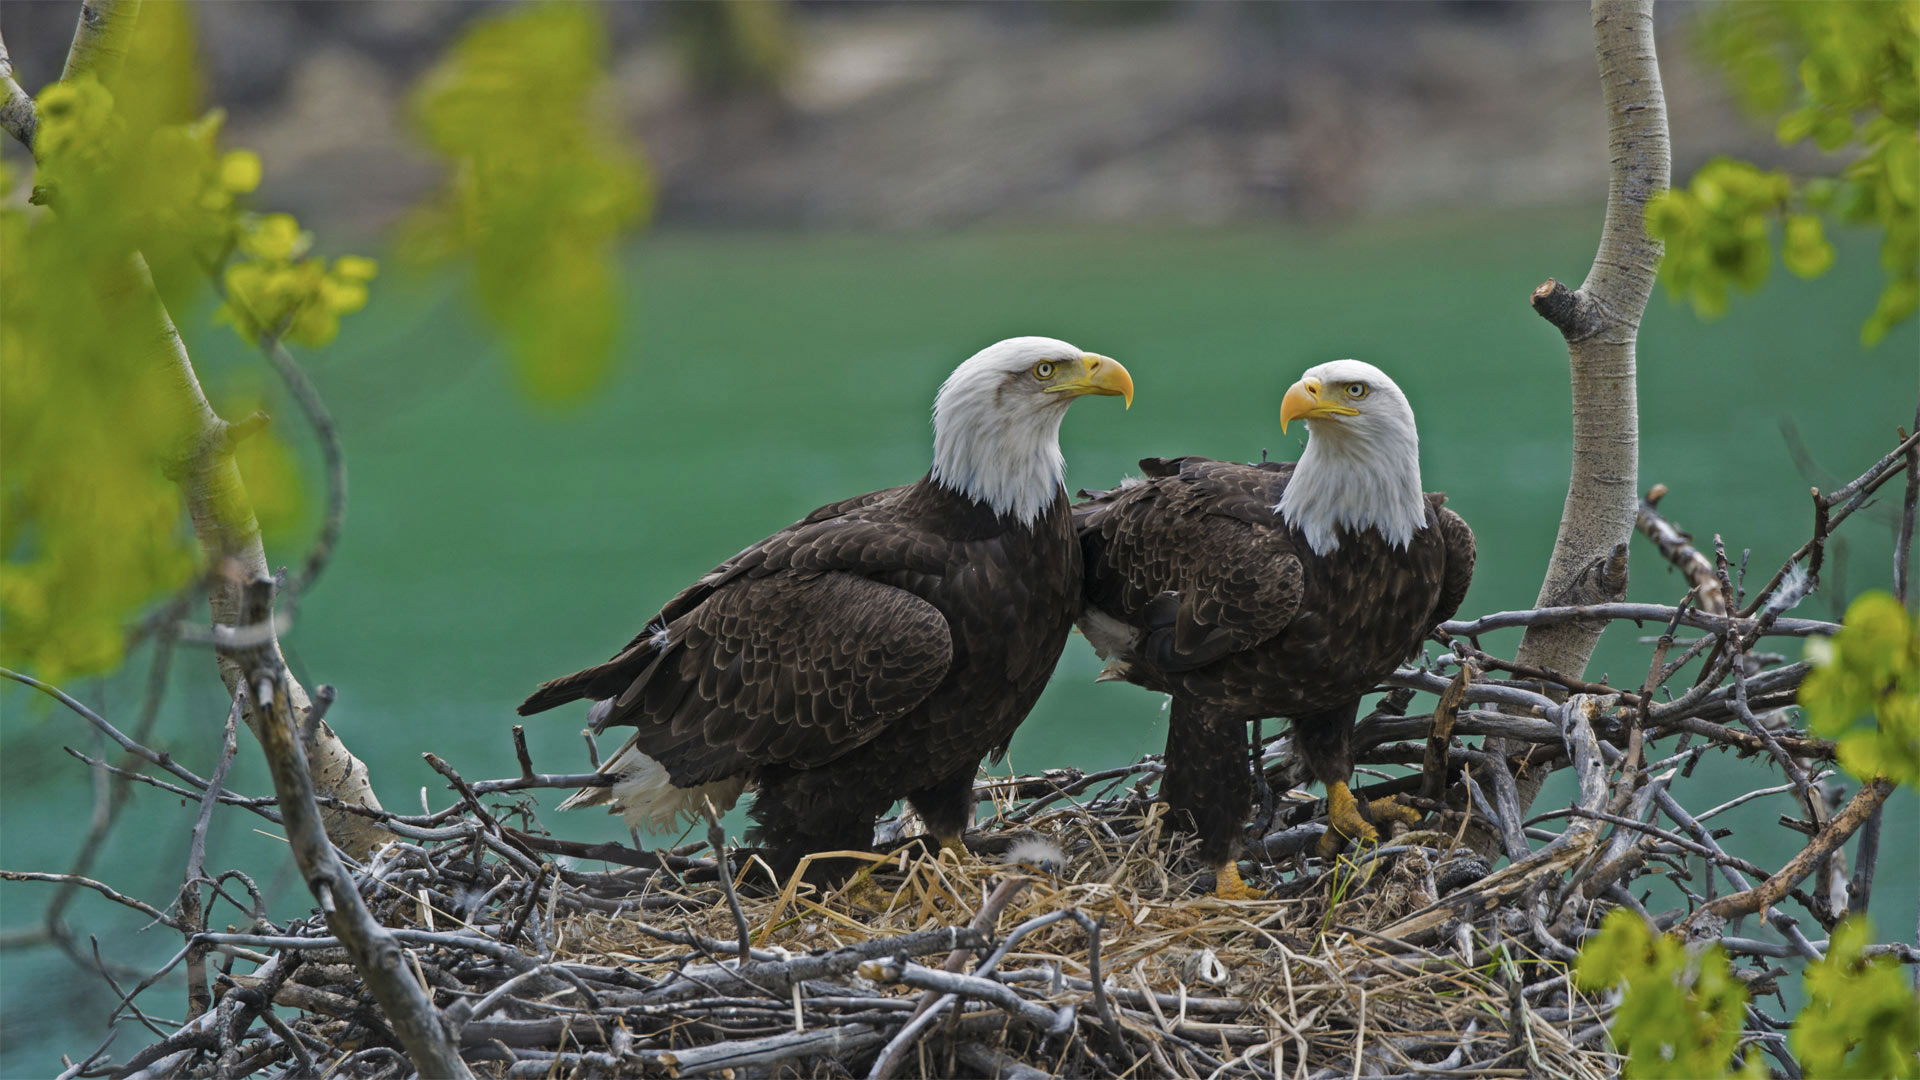 Bald eagle pair with a chick in their nest near the Yukon River, Yukon, Canada - Mark Newman